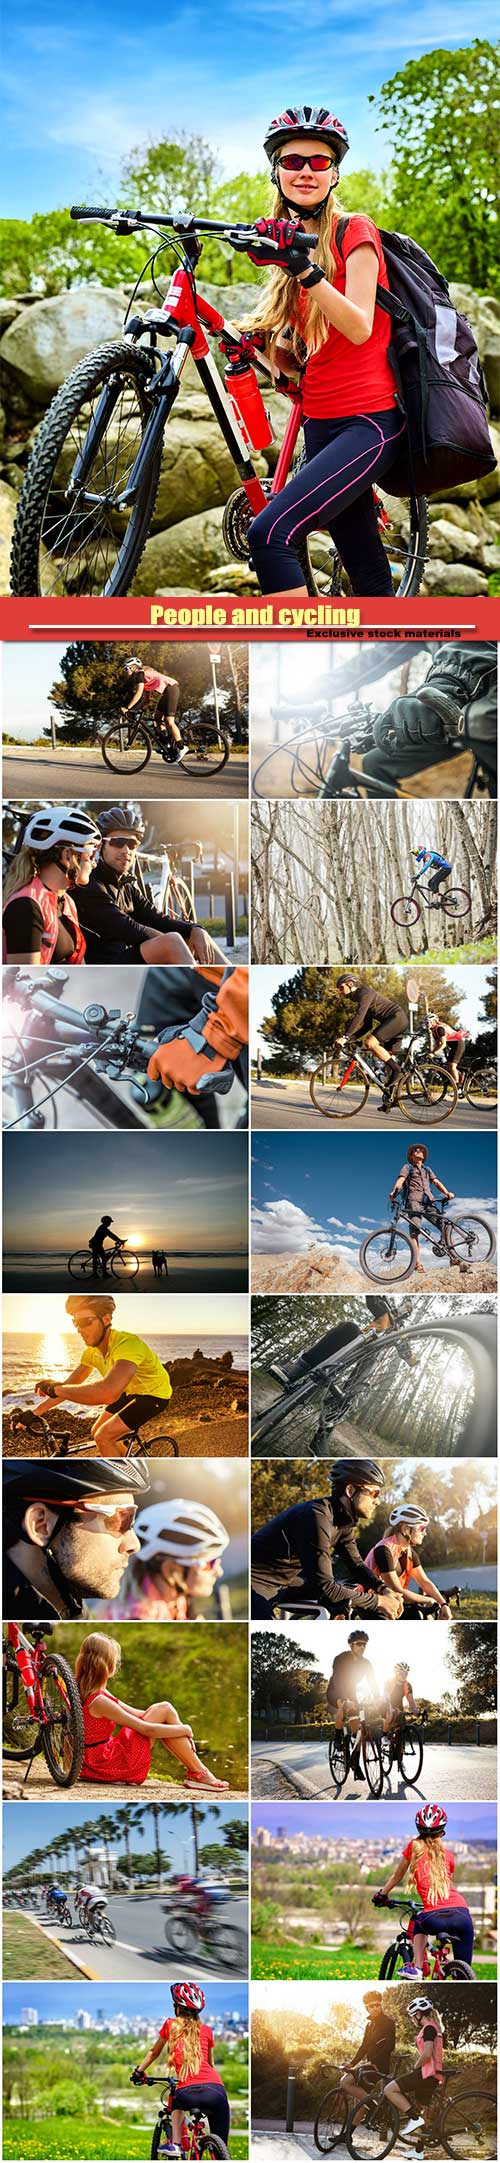 People and cycling, fitness and active lifestyle